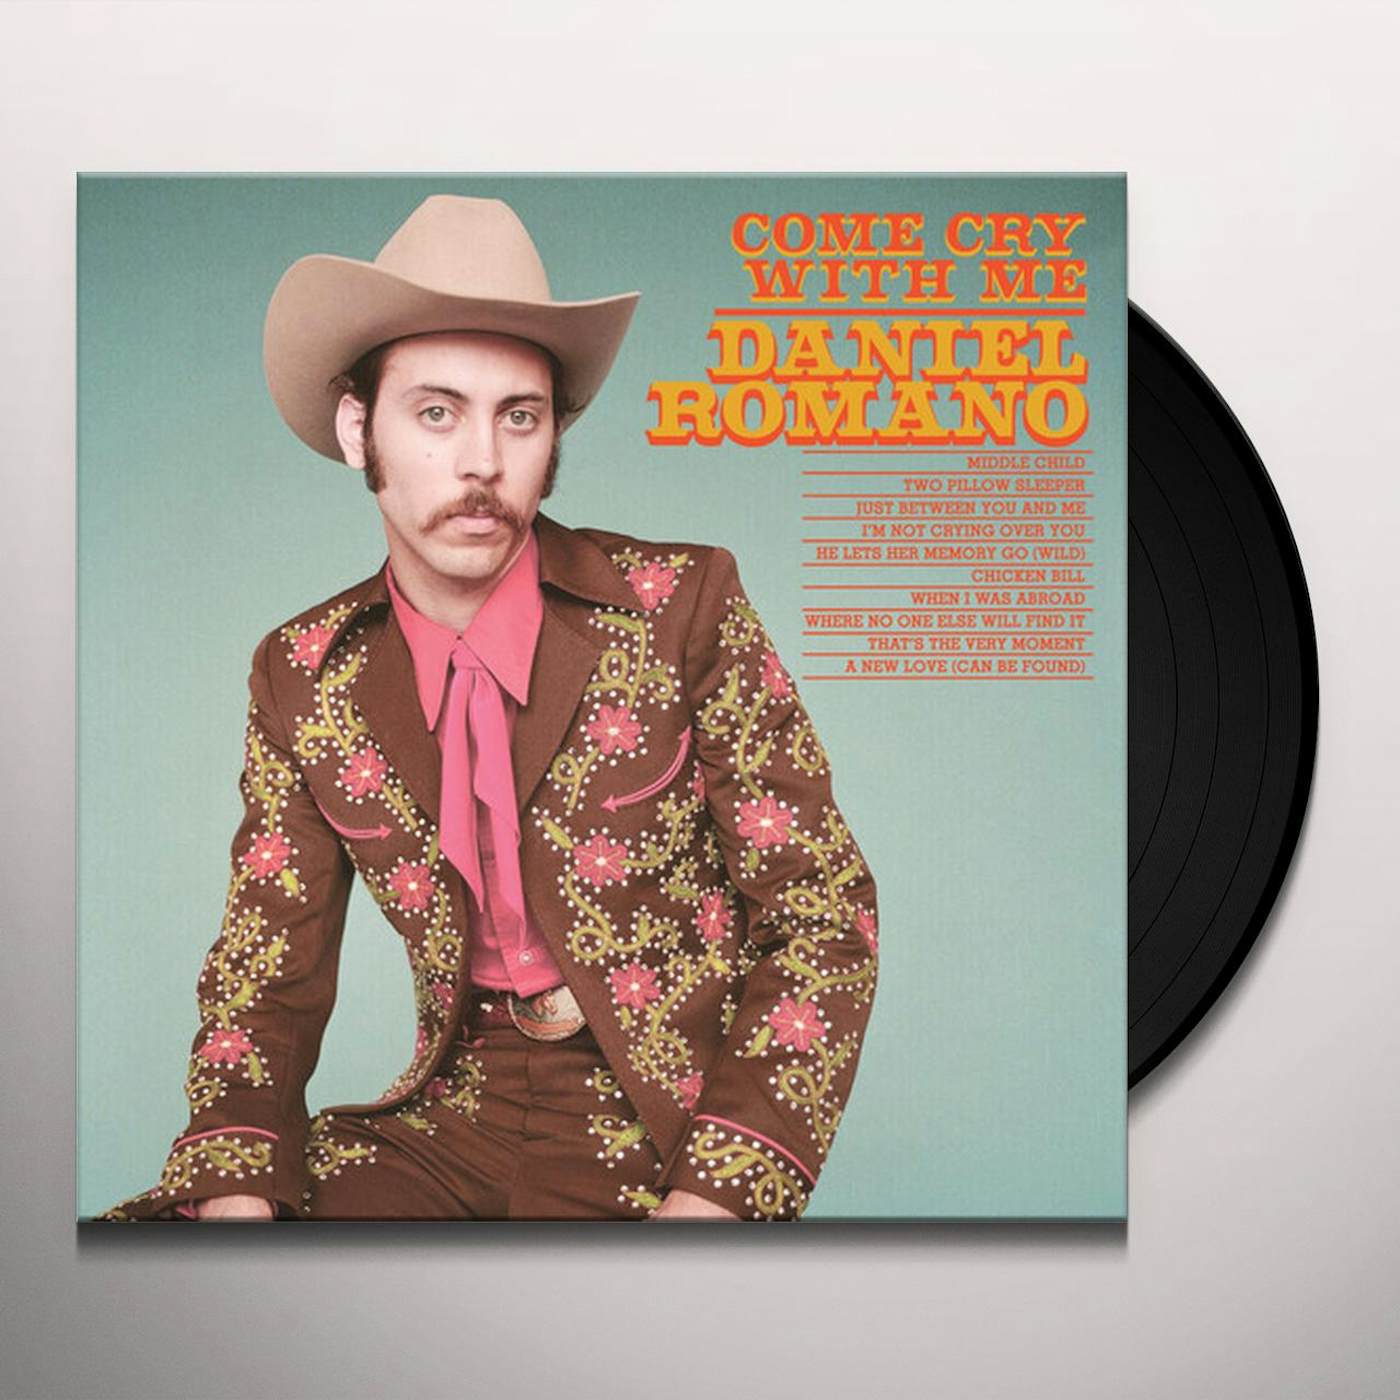 Daniel Romano COME CRY WITH ME (CAN) (Vinyl)